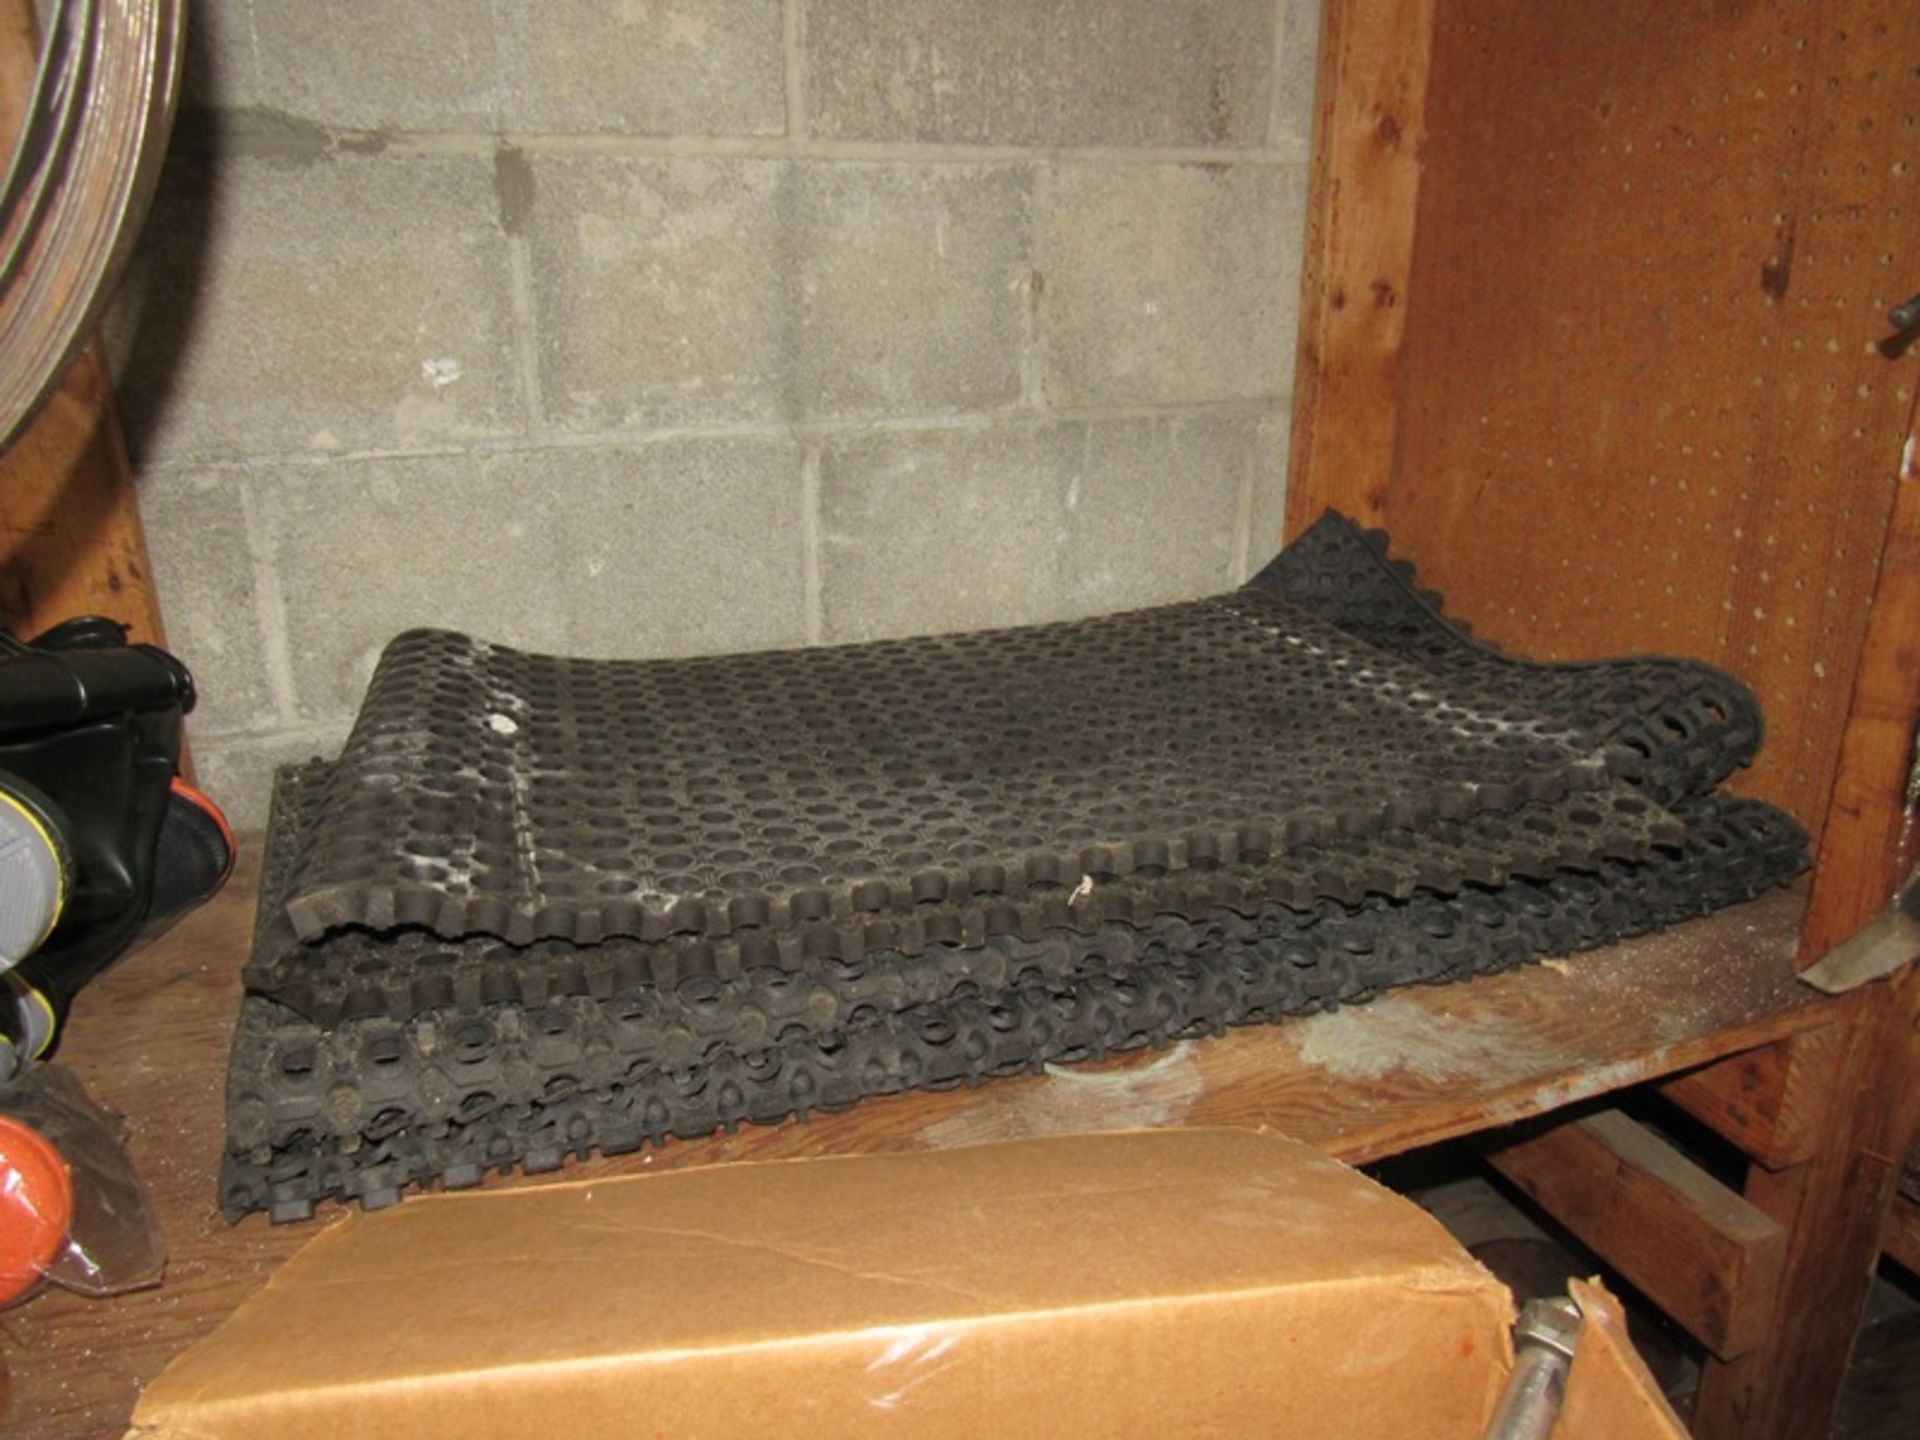 Lot Rubber Boot Wash, Rubber Anti-Fatigue Mats, Rubber Boots, (5) size 12, (3) size 11, (1) size - Image 2 of 4